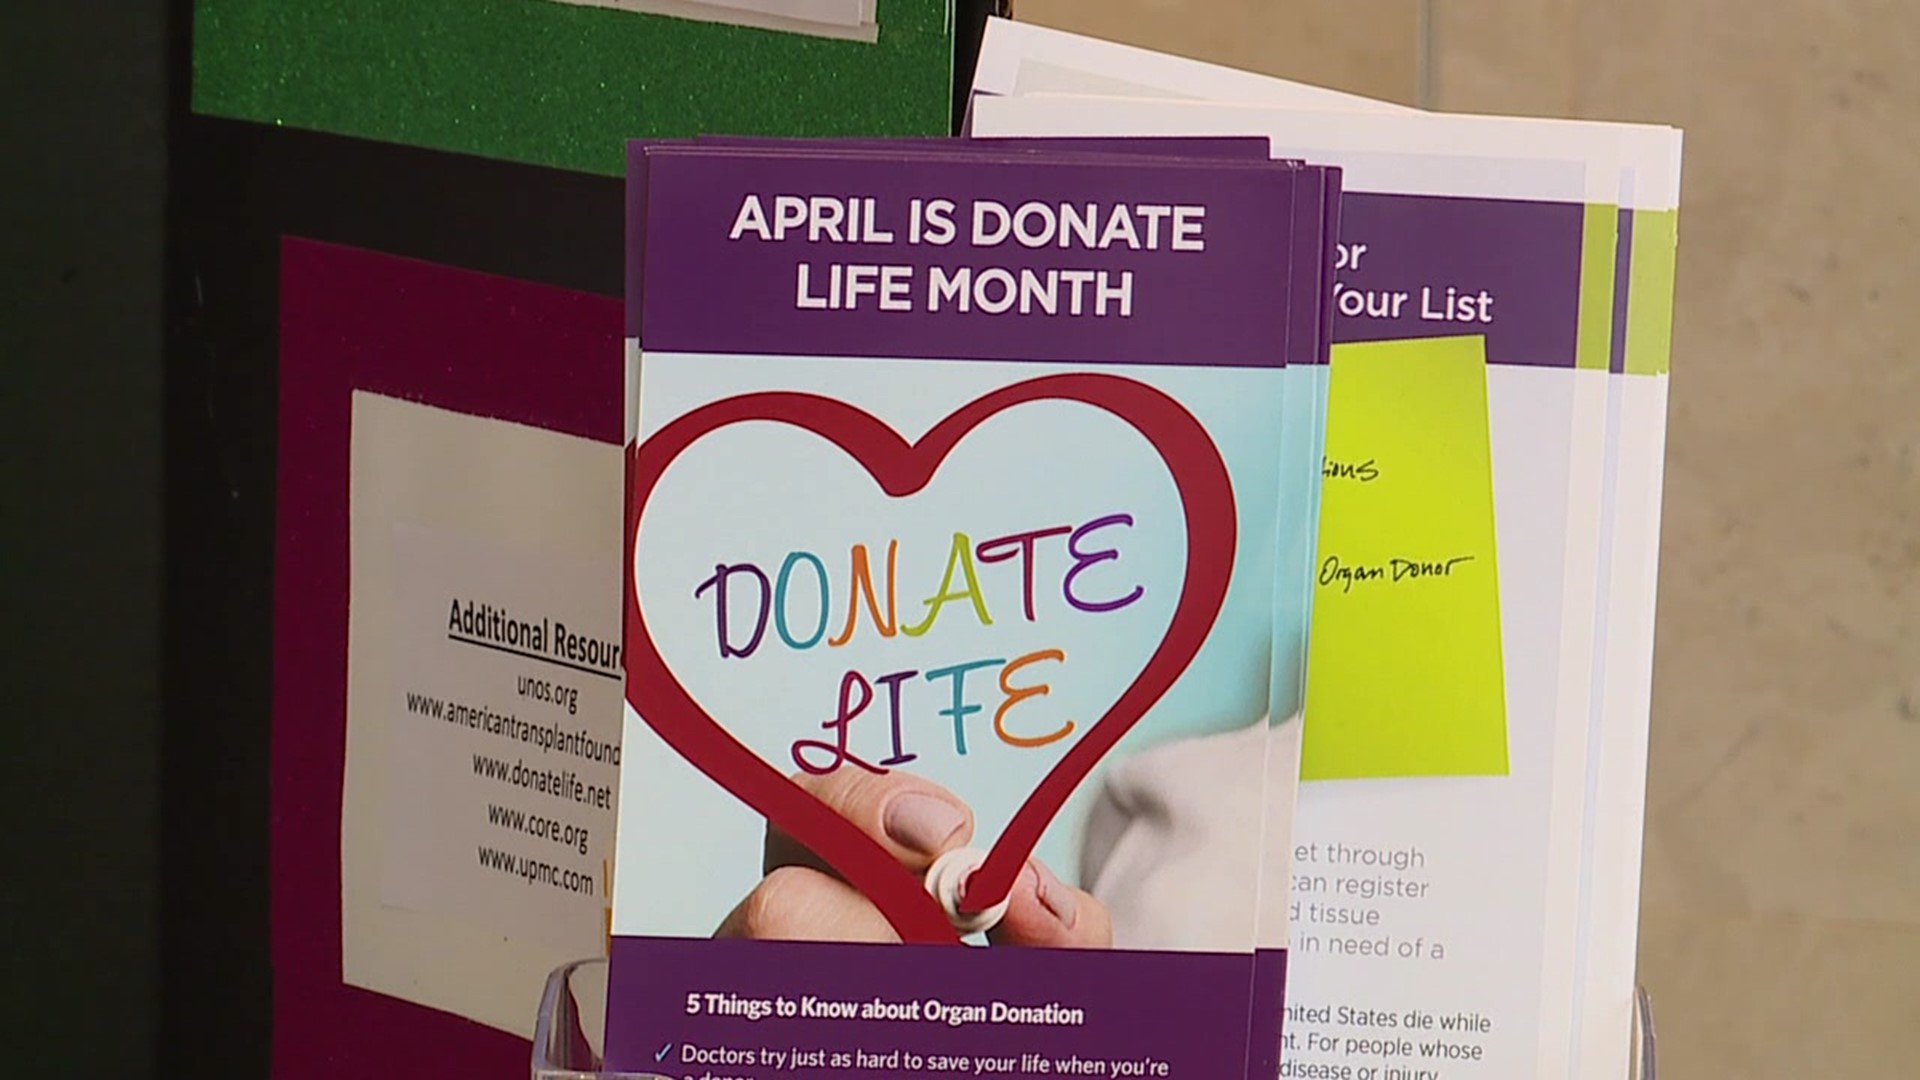 Throughout April, UPMC is honoring organ donors and encouraging more people to donate.